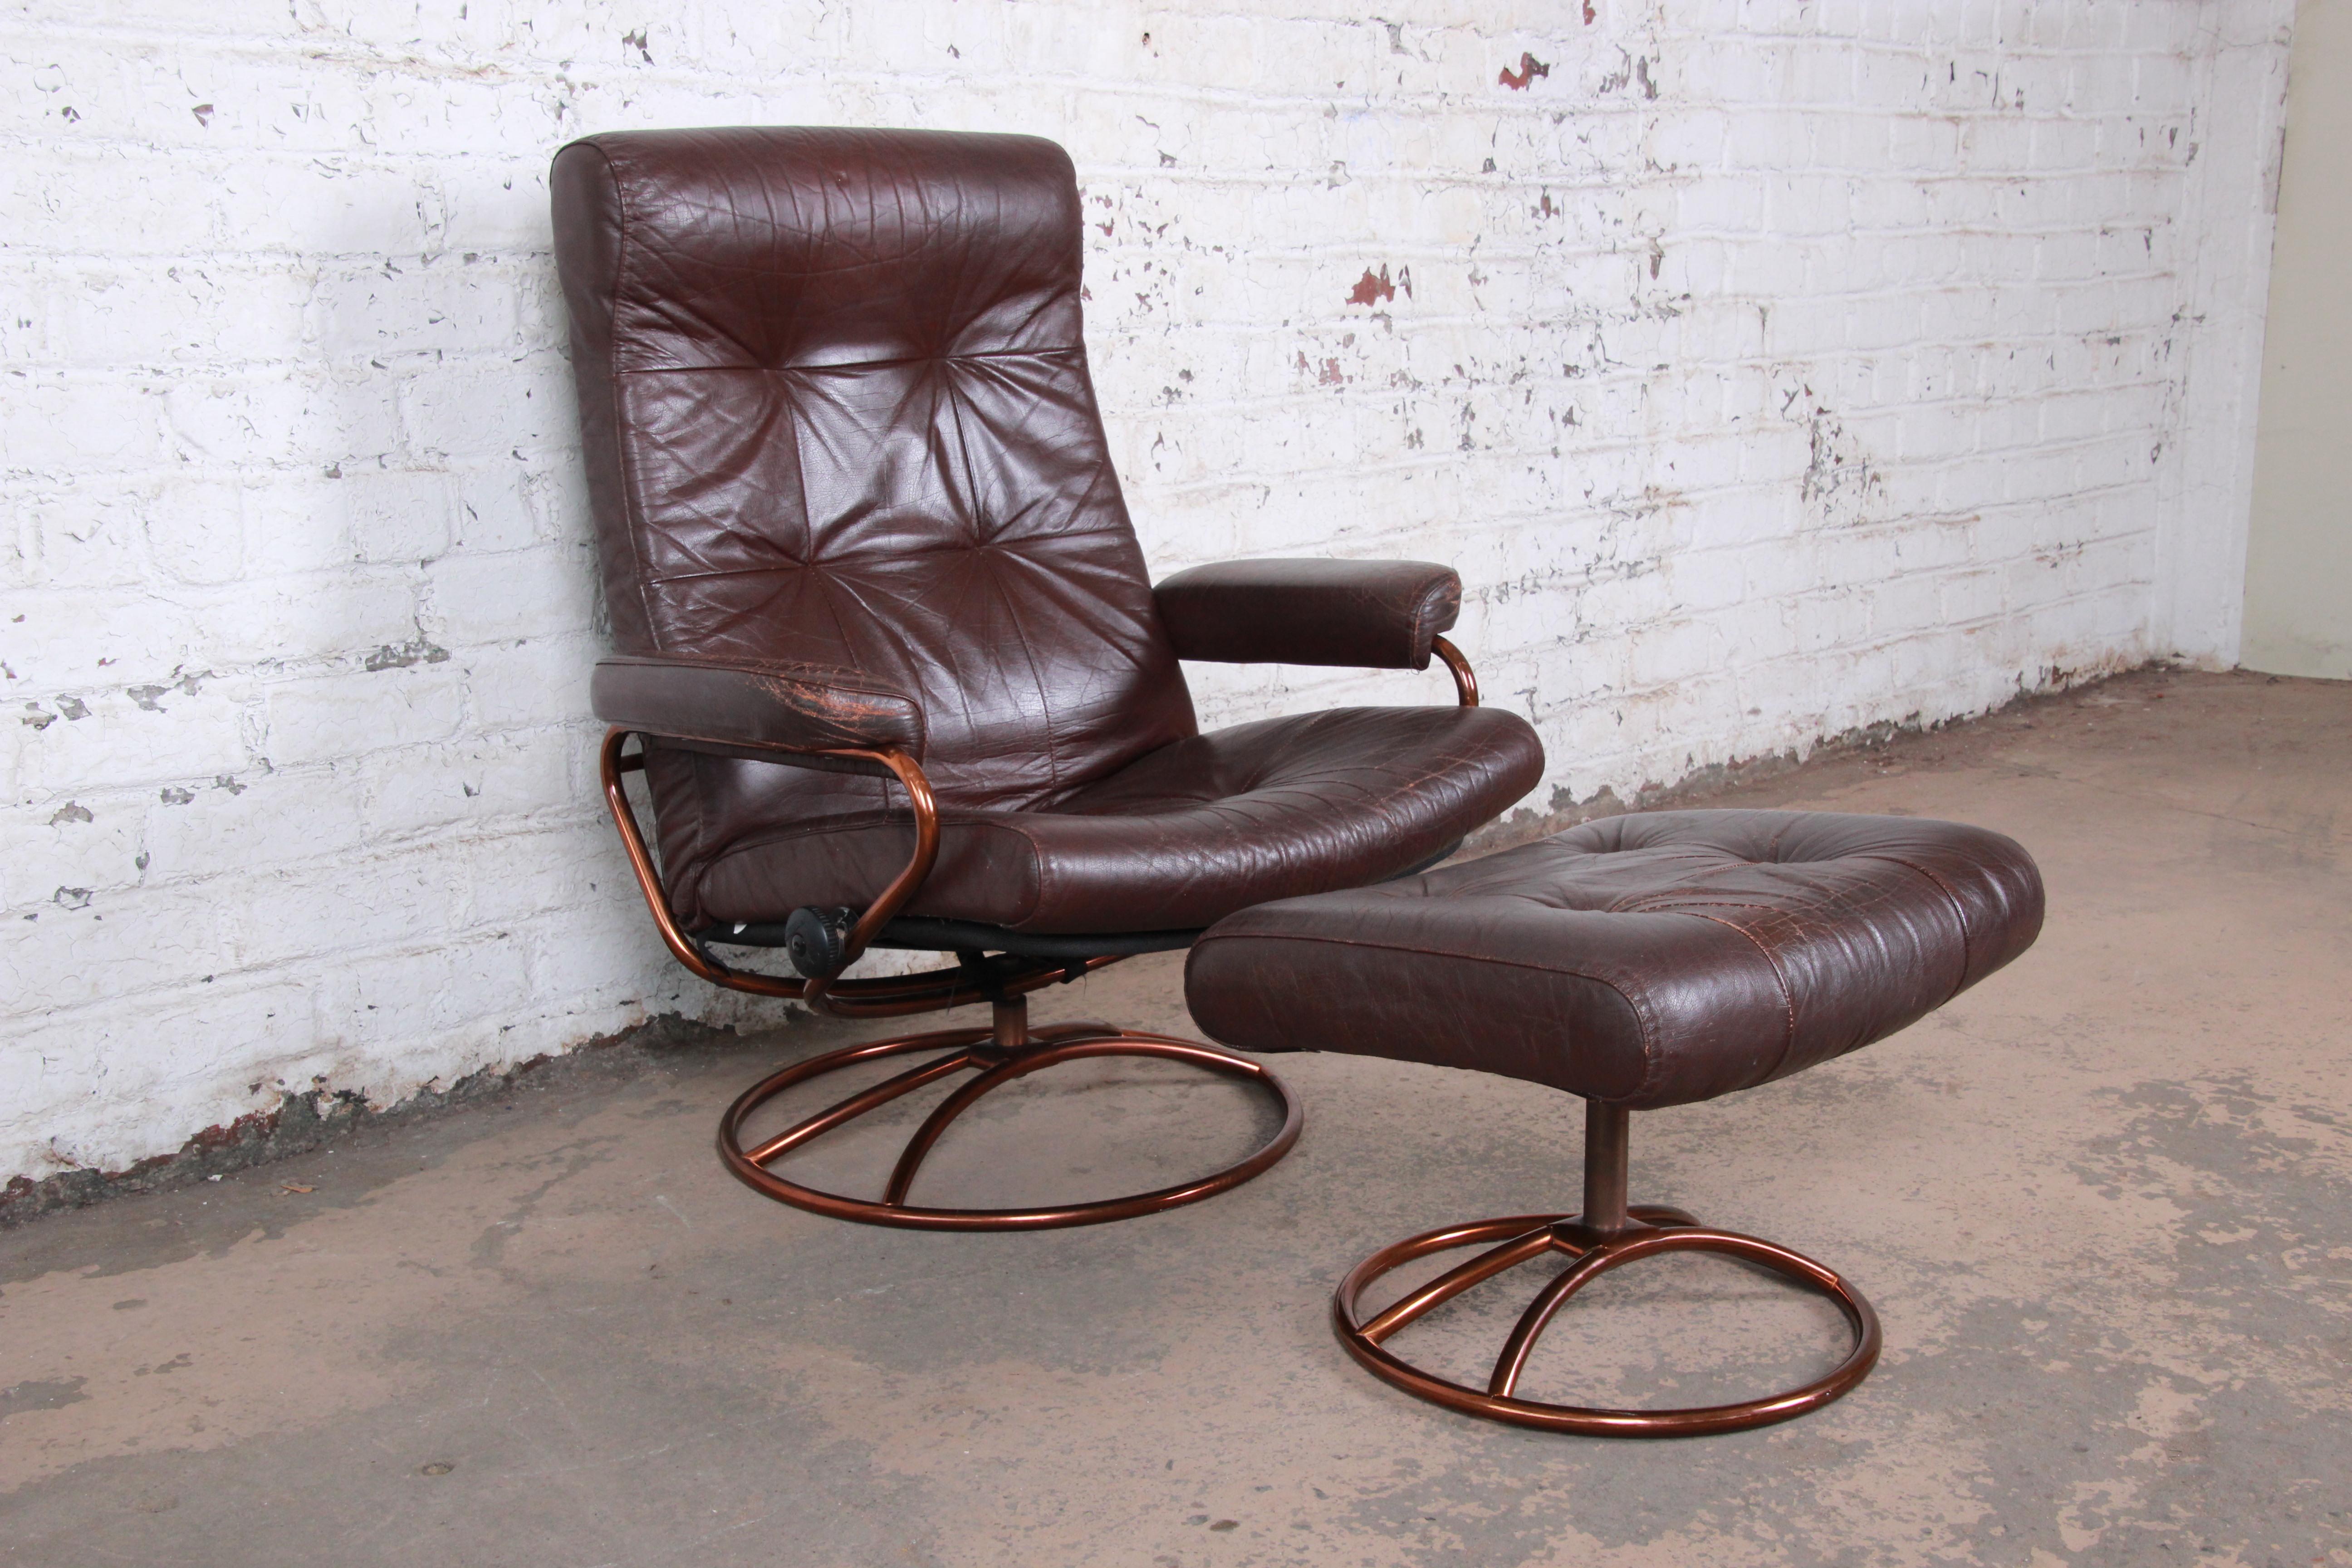 A beautiful vintage Ekornes Stressless lounge chair and ottoman in brown leather. The chair features soft brown leather upholstery and sleek Scandinavian design. The leather is worn in with a nice patina. Both the chair and ottoman have swivelling